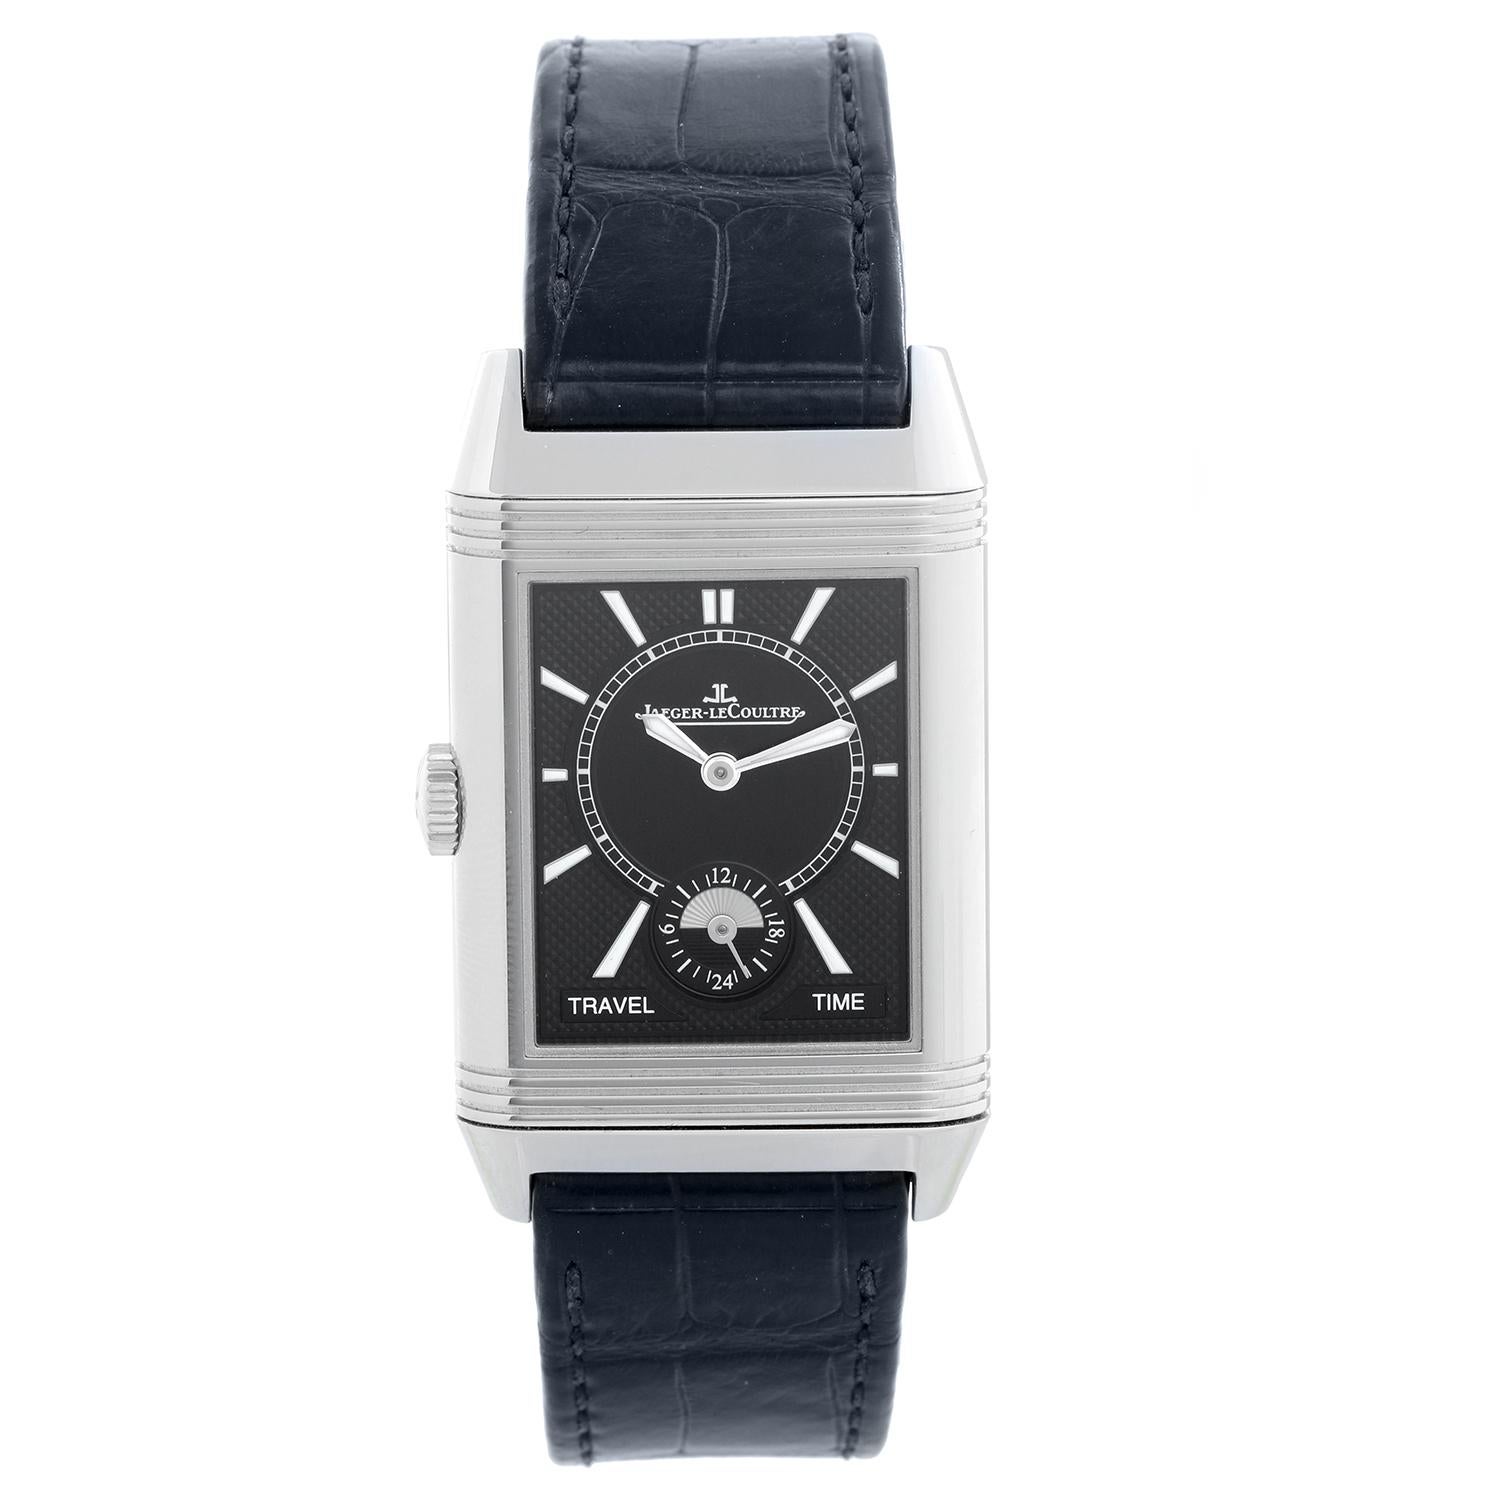 Jaeger-LeCoultre Reverso Classic Q3848420 Men's Watch  - Manual winding 19 jewel. Stainless steel case (47 X 28.3mm). Silver dial with Arabic numerals, black dial with stick markers. JLC Strap band with stainless steel Jaeger deployant clasp.